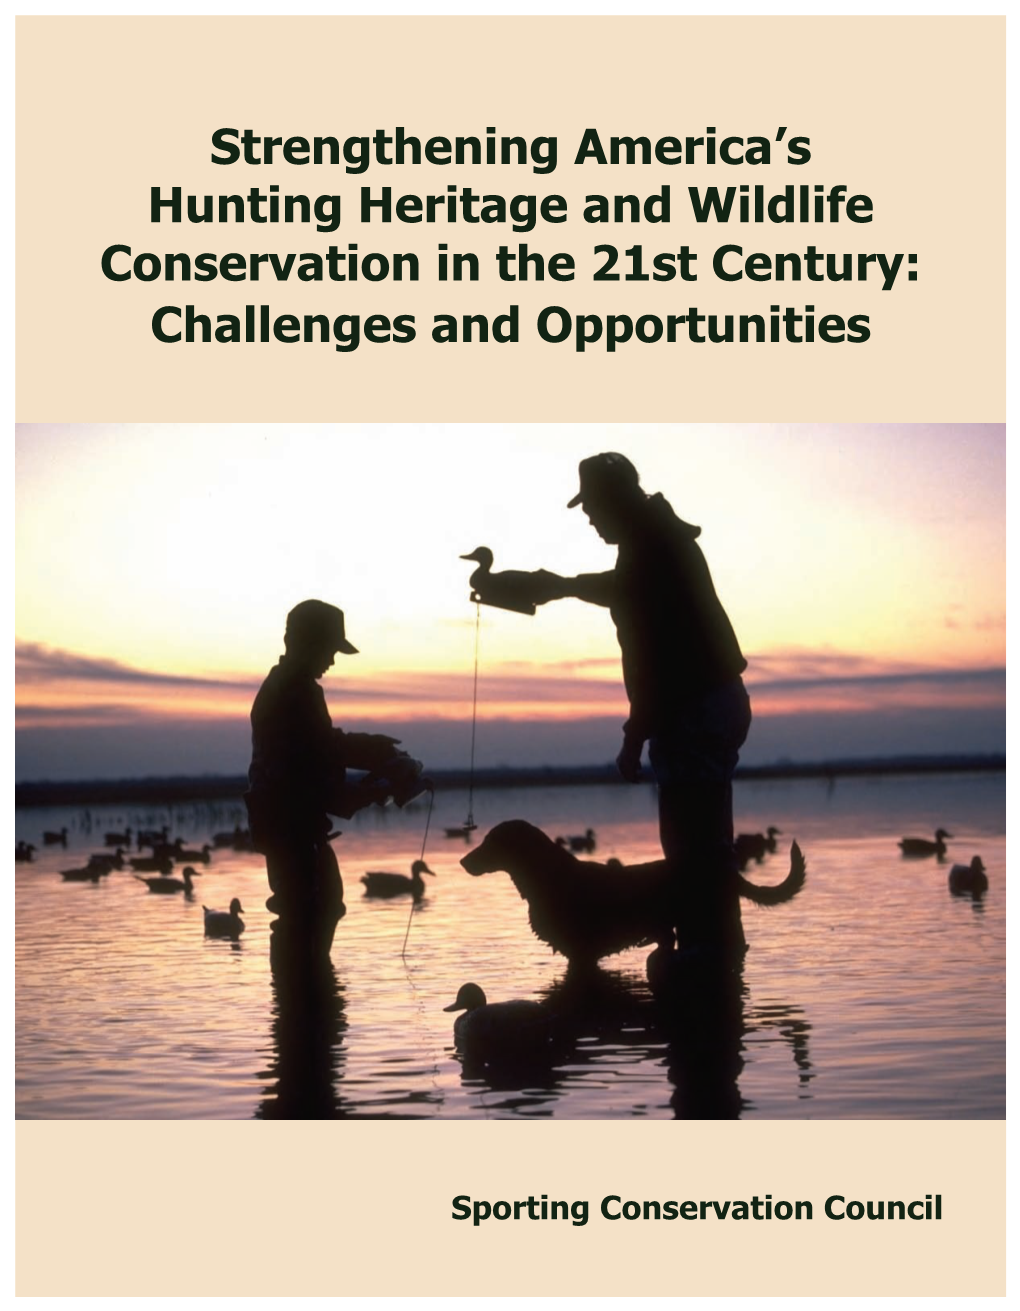 Strengthening America's Hunting Heritage and Wildlife Conservation